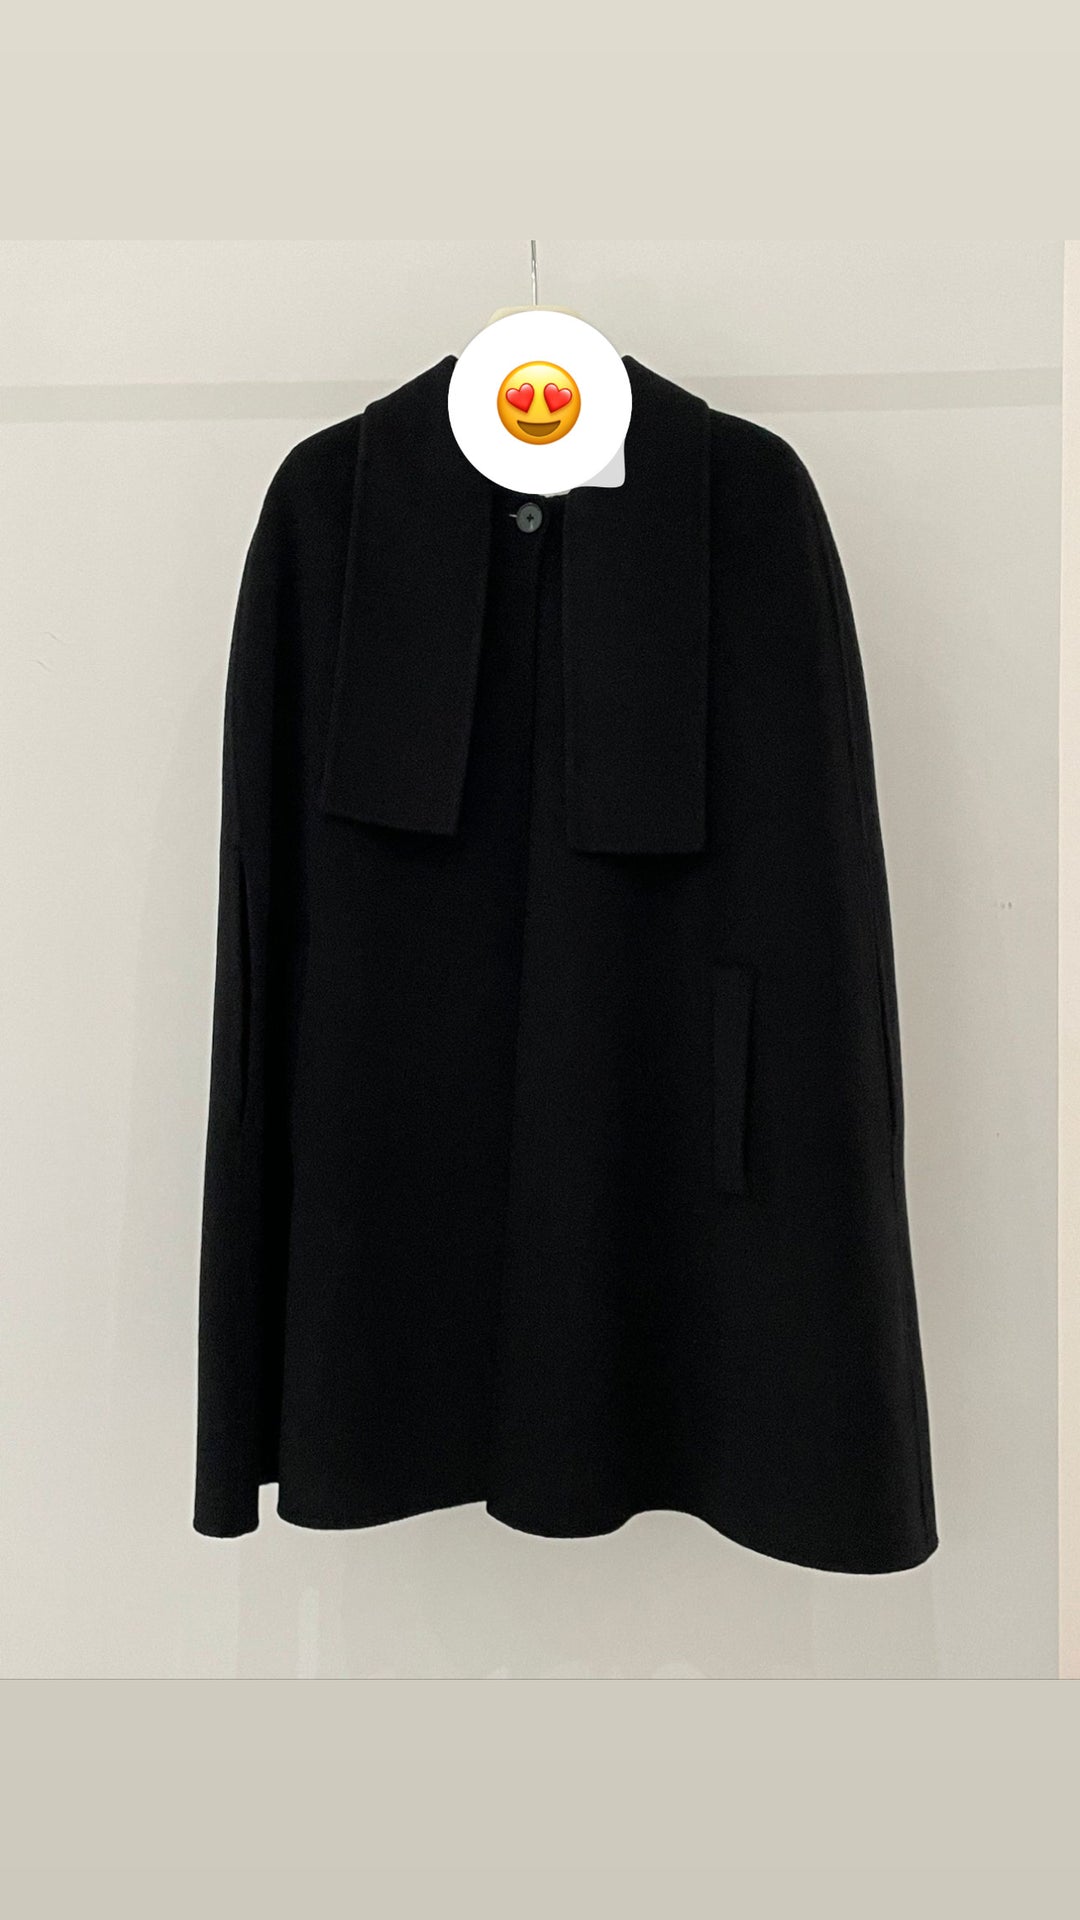 Tao Thermal Tech • Elegant Double Wool Cape • Coat with Scarf • 100% Australian Wool • High Vibrational Frequency